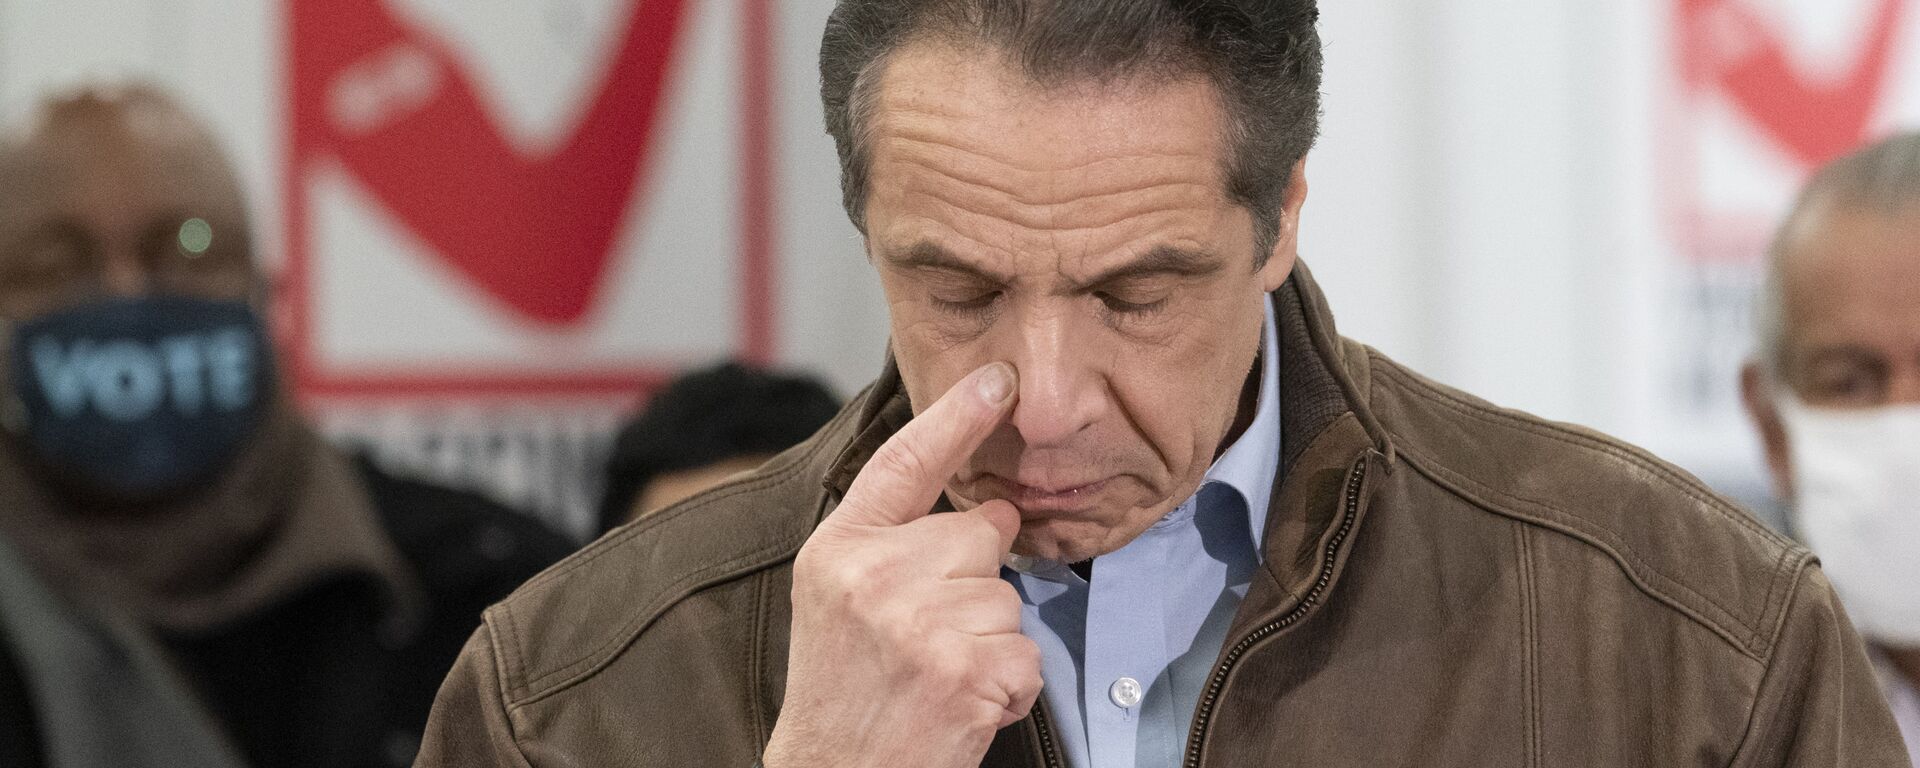 New York Gov. Andrew Cuomo touches his nose during a visit to a new COVID-19 vaccination site, Monday, March 15, 2021, at the State University of New York in Old Westbury. The site is scheduled to open on Friday.  - Sputnik International, 1920, 11.04.2021